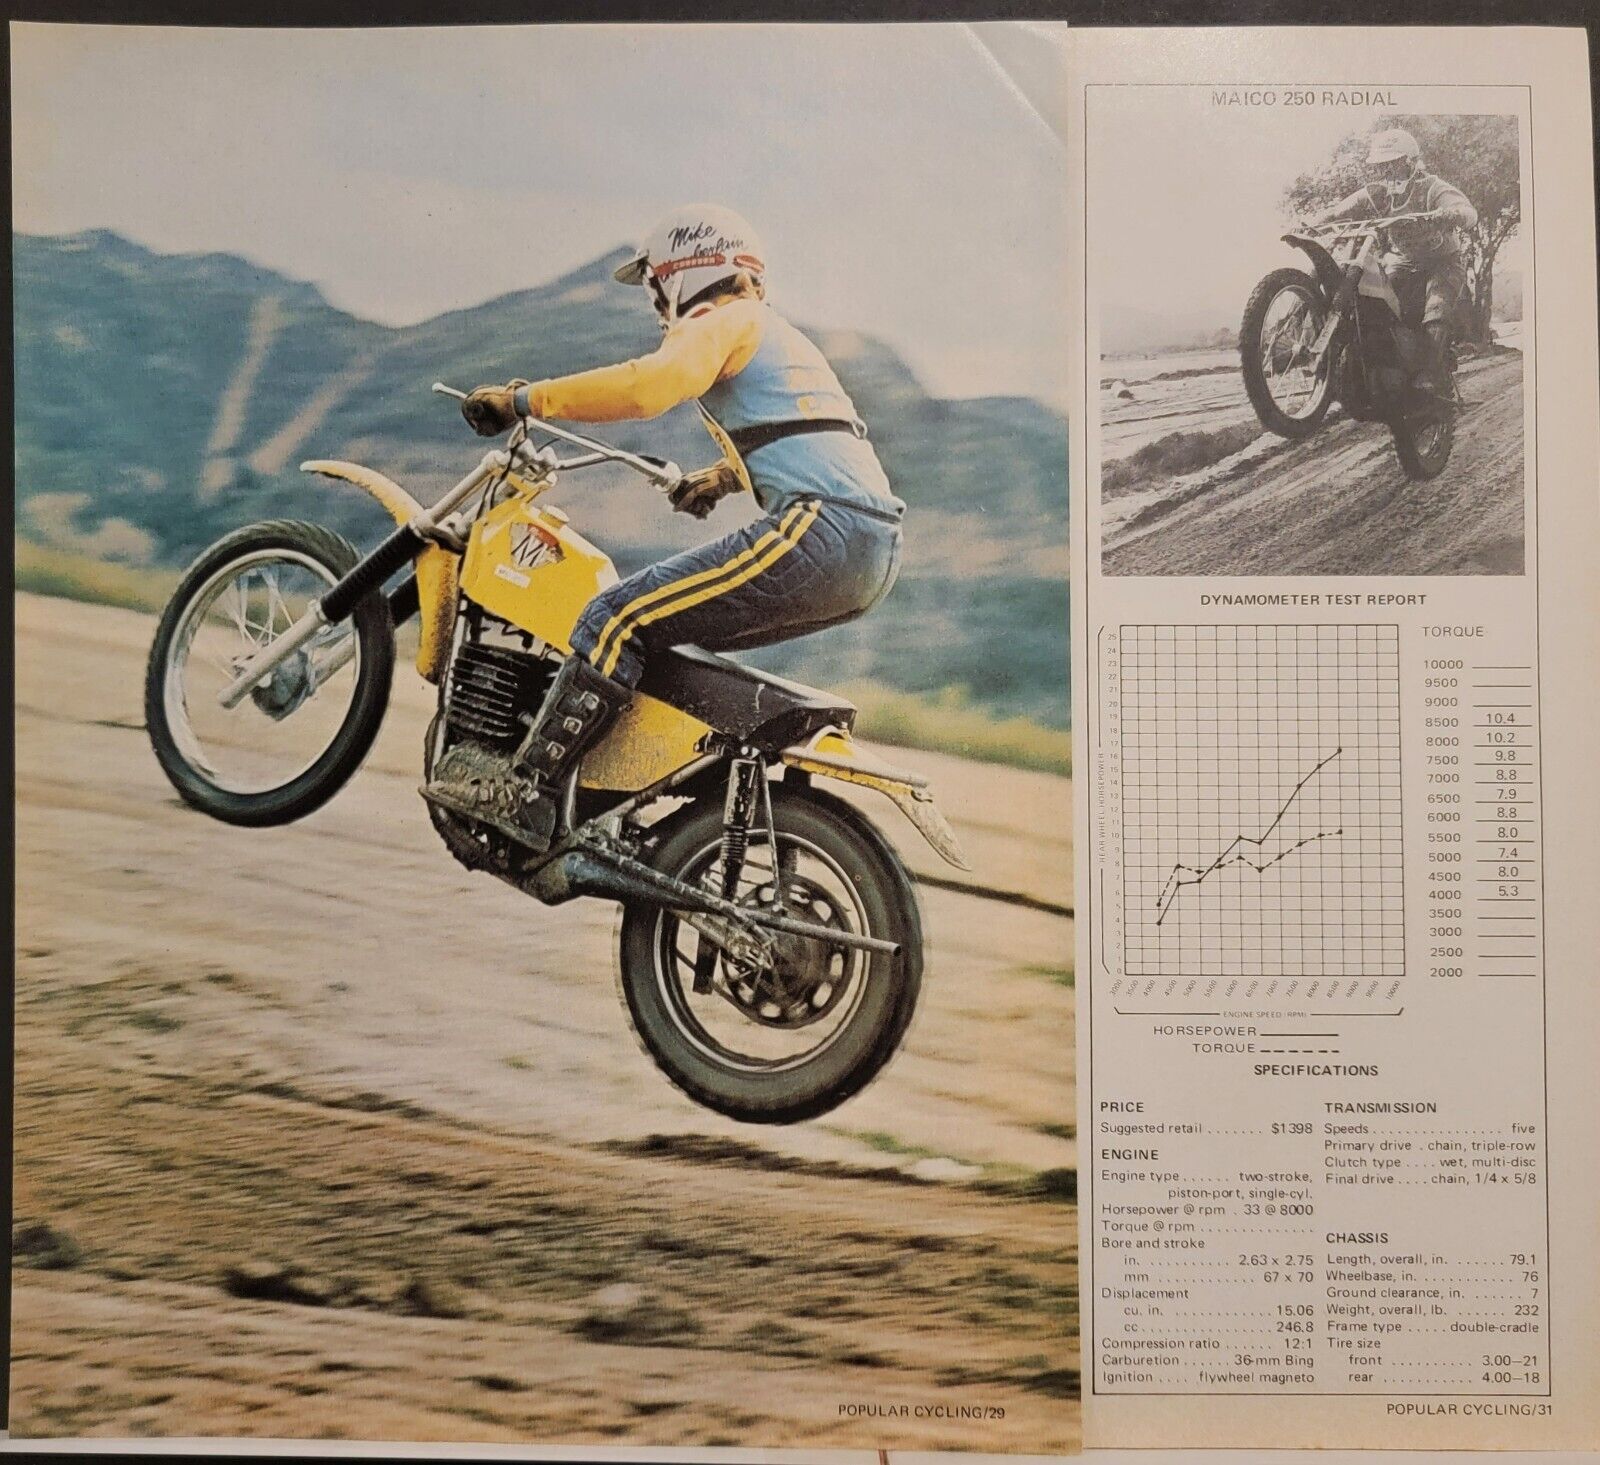 1973 2p Maico 250 Radial Pin Up with specs